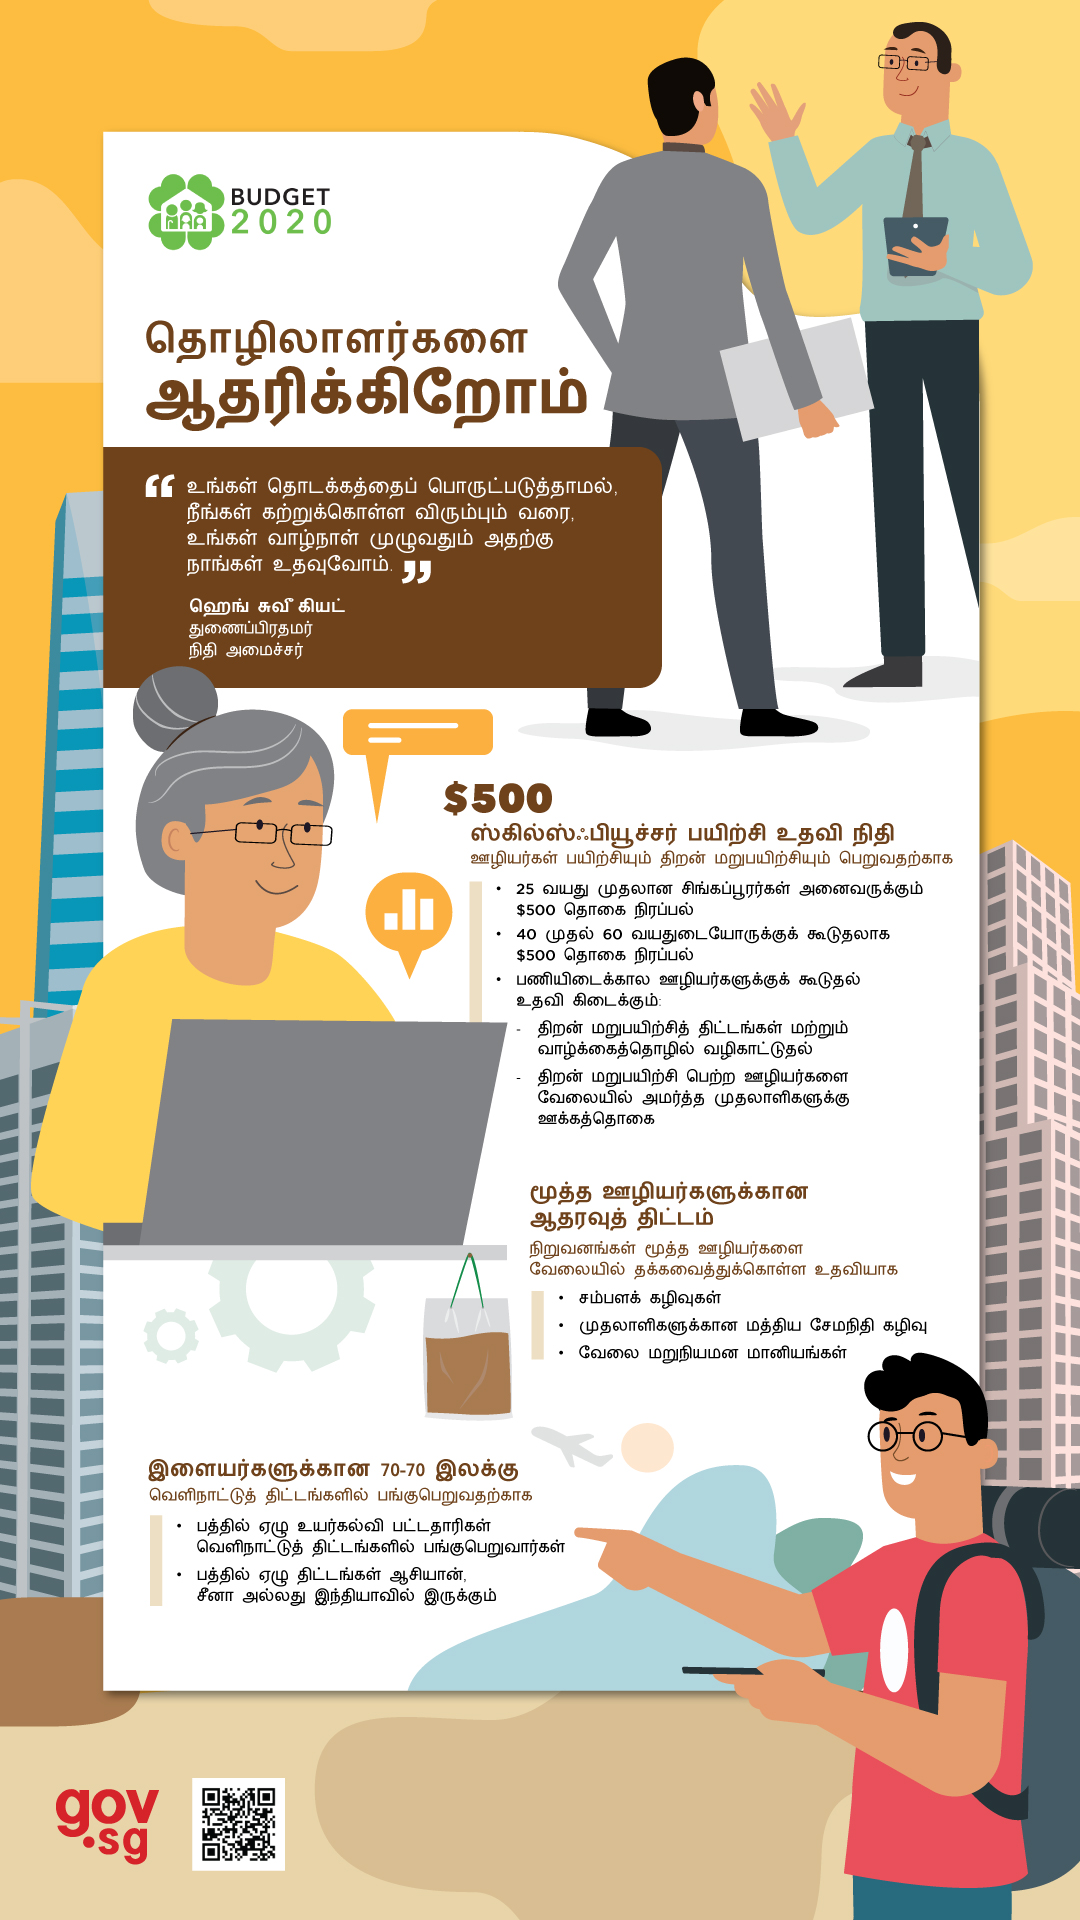 Tamil - Helping workers stay employed and have good jobs